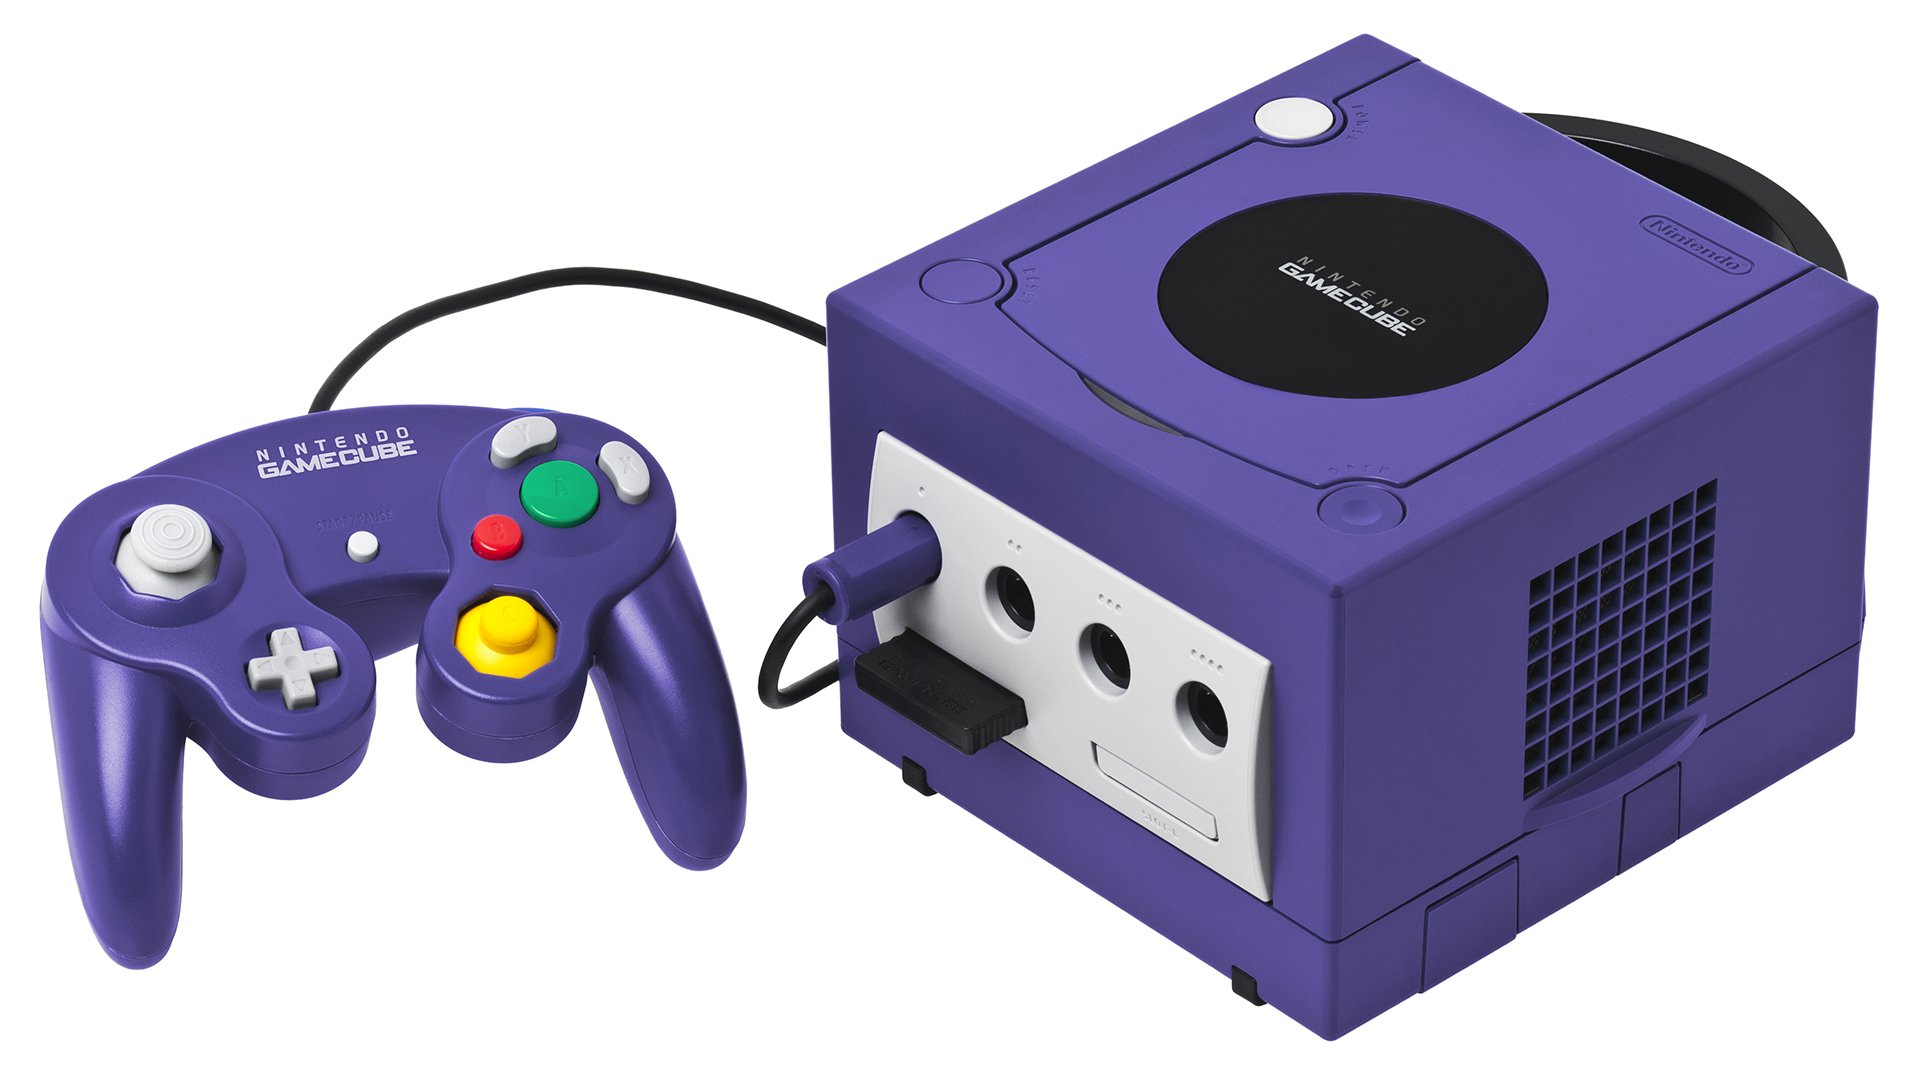 Play Gamecube games on your Wii U!